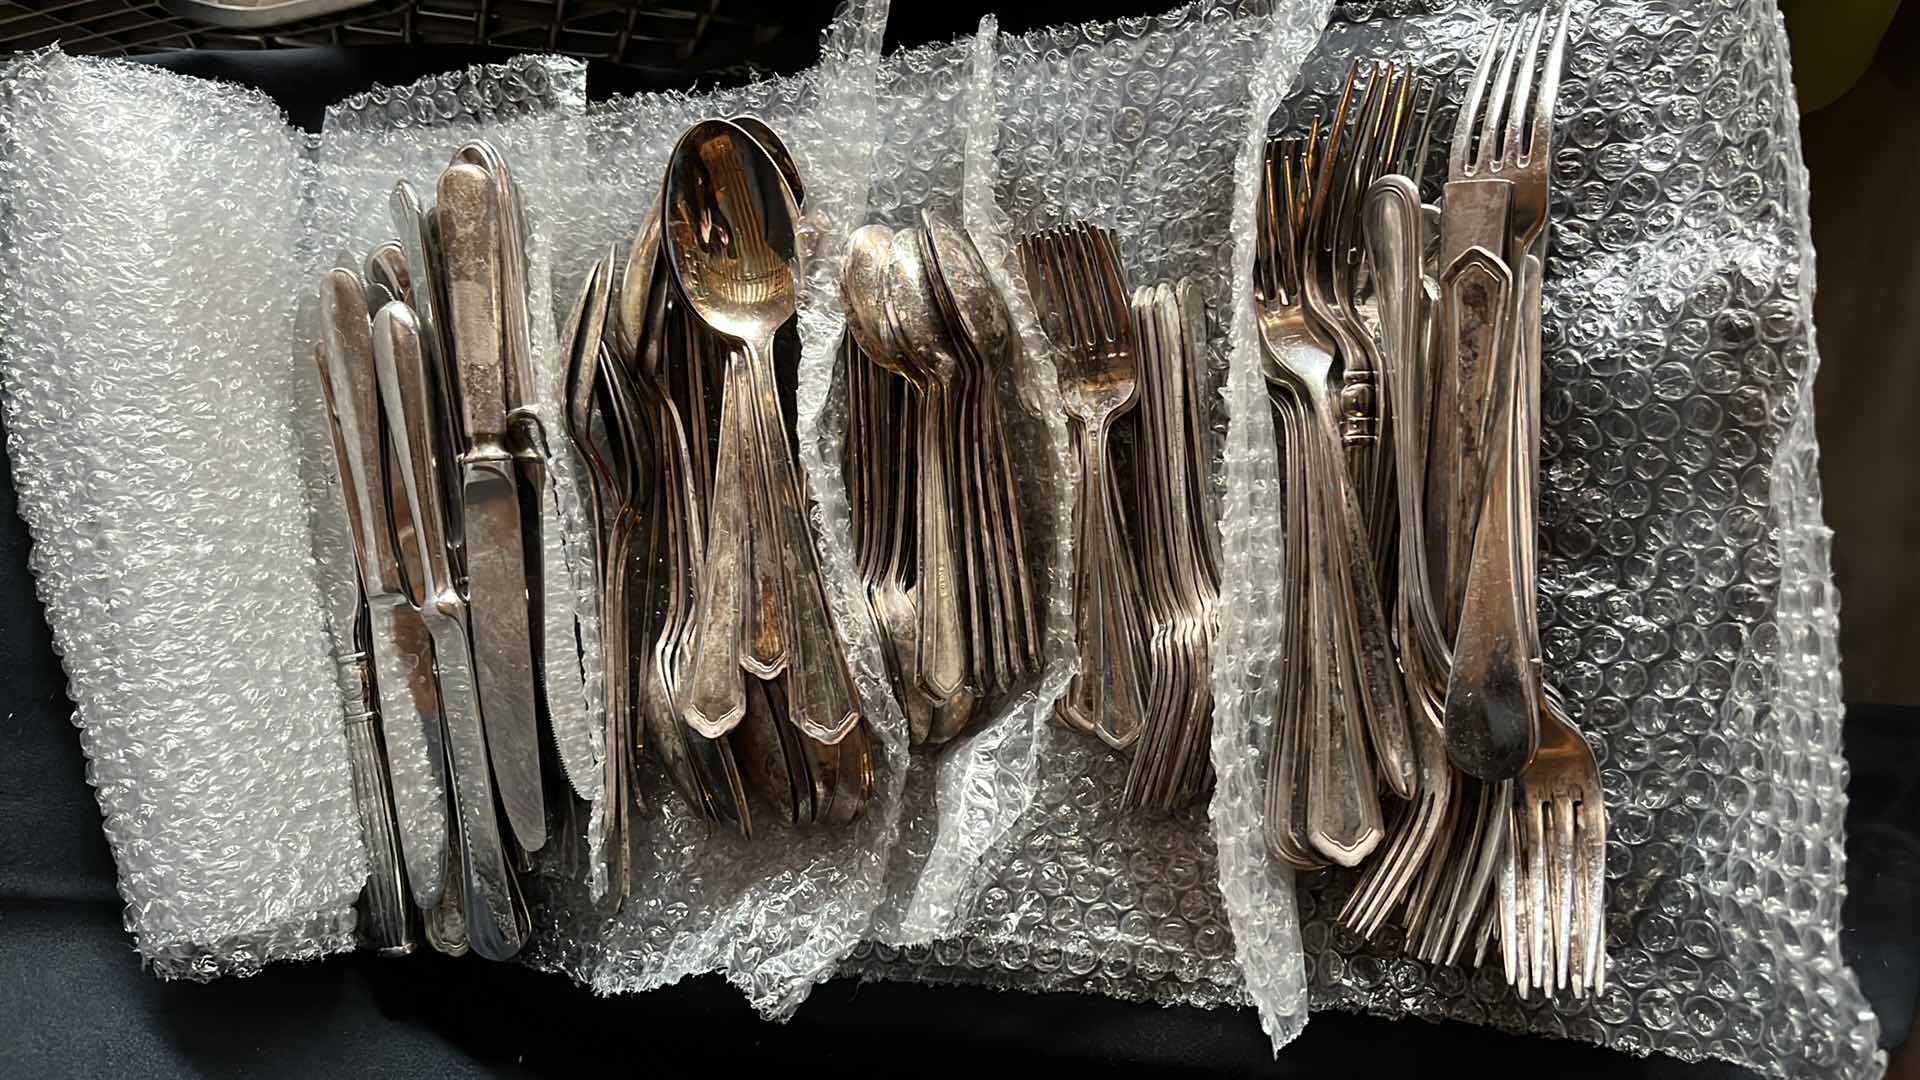 Photo 2 of FLATWARE VARIOUS STYLES, BUTTER KNIFE, SMALL SPOON, SERVING SPOON, SALAD FORK, SMALL FORK 20 EACH (100 TOTAL)